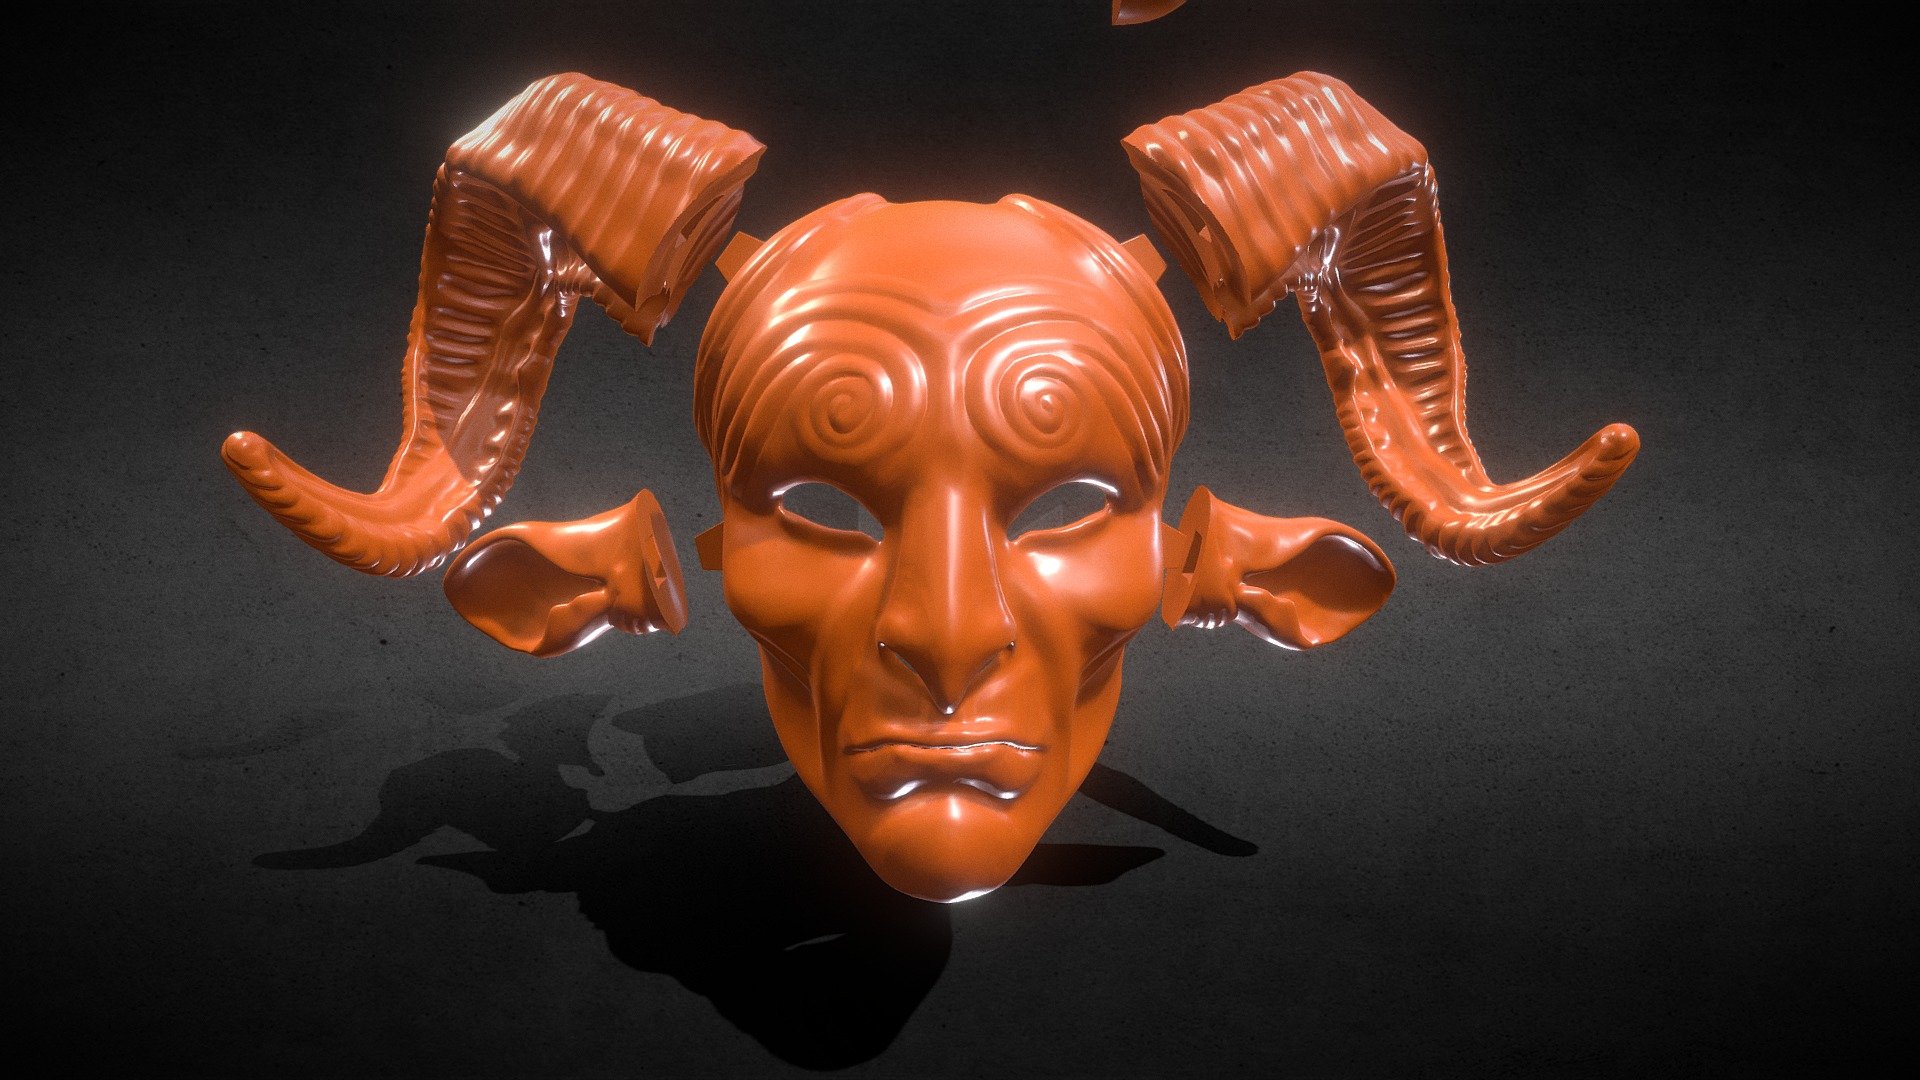 Fanart of a mask of the pan from pan's labyrinth movie ready for 3d print I included the OBJ, STL, and Zbrush tool file I separated in 4 parts the mask or complete for easy 3d print if you need 3d game assets or stl files I can do commission works 3d model